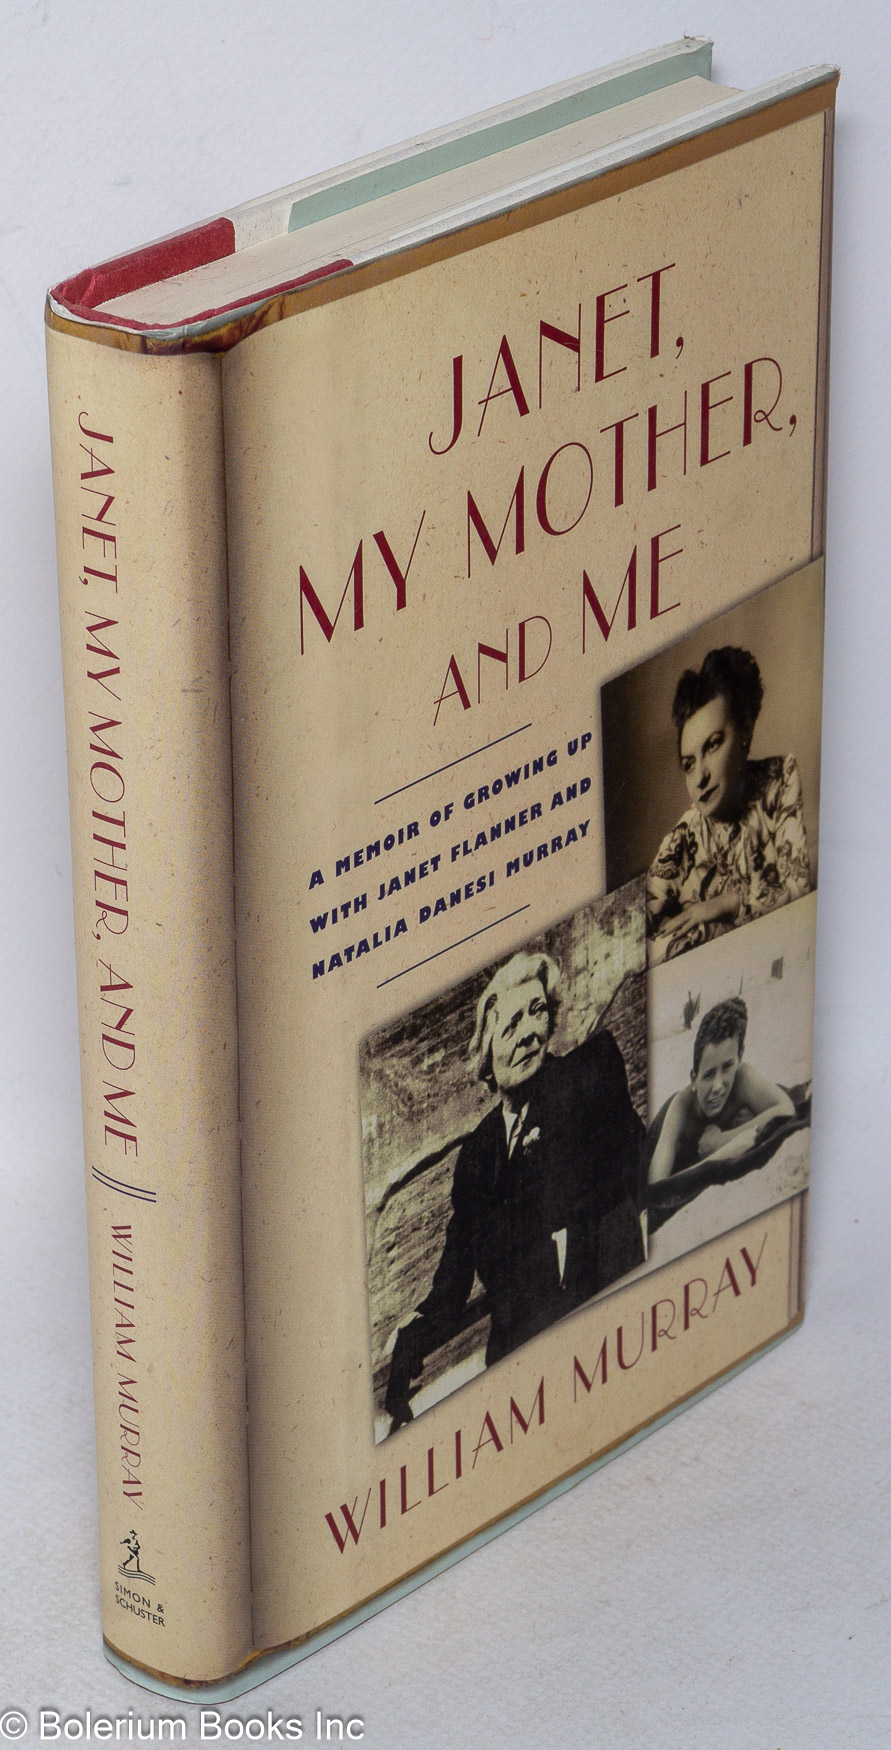 Janet, My Mother, and Me: a memoir of growing up with Janet Flanner & Natalia Danesi Murray - Flanner, Janet] William Murray